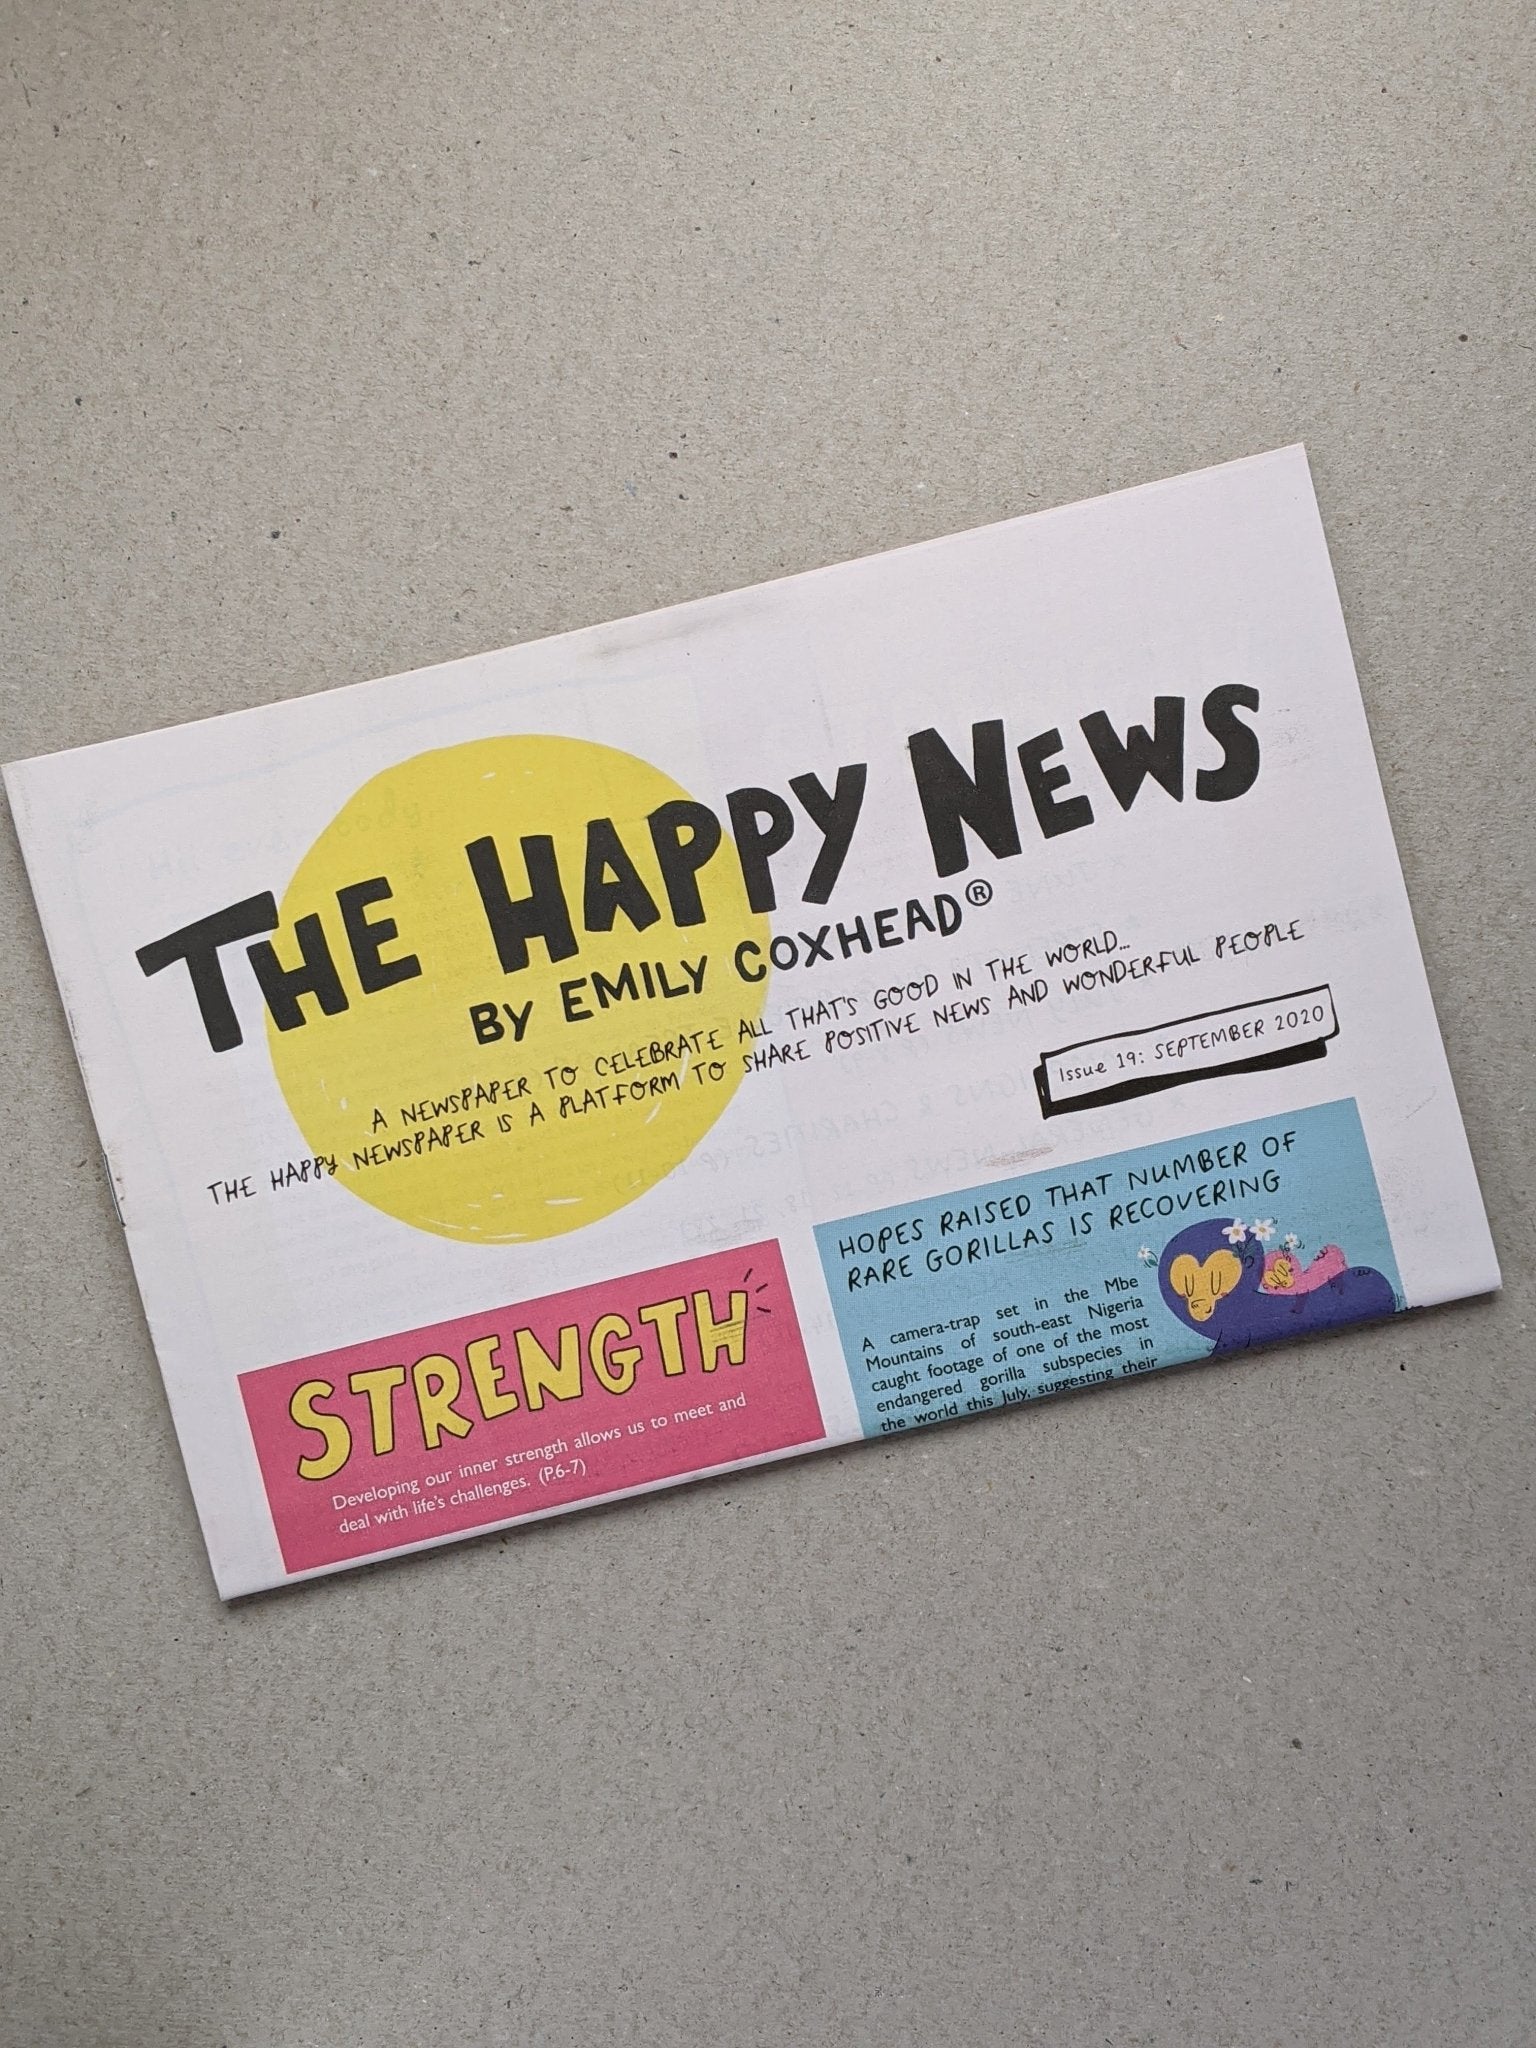 Happy News - Issue 19 - The Stationery Cupboard